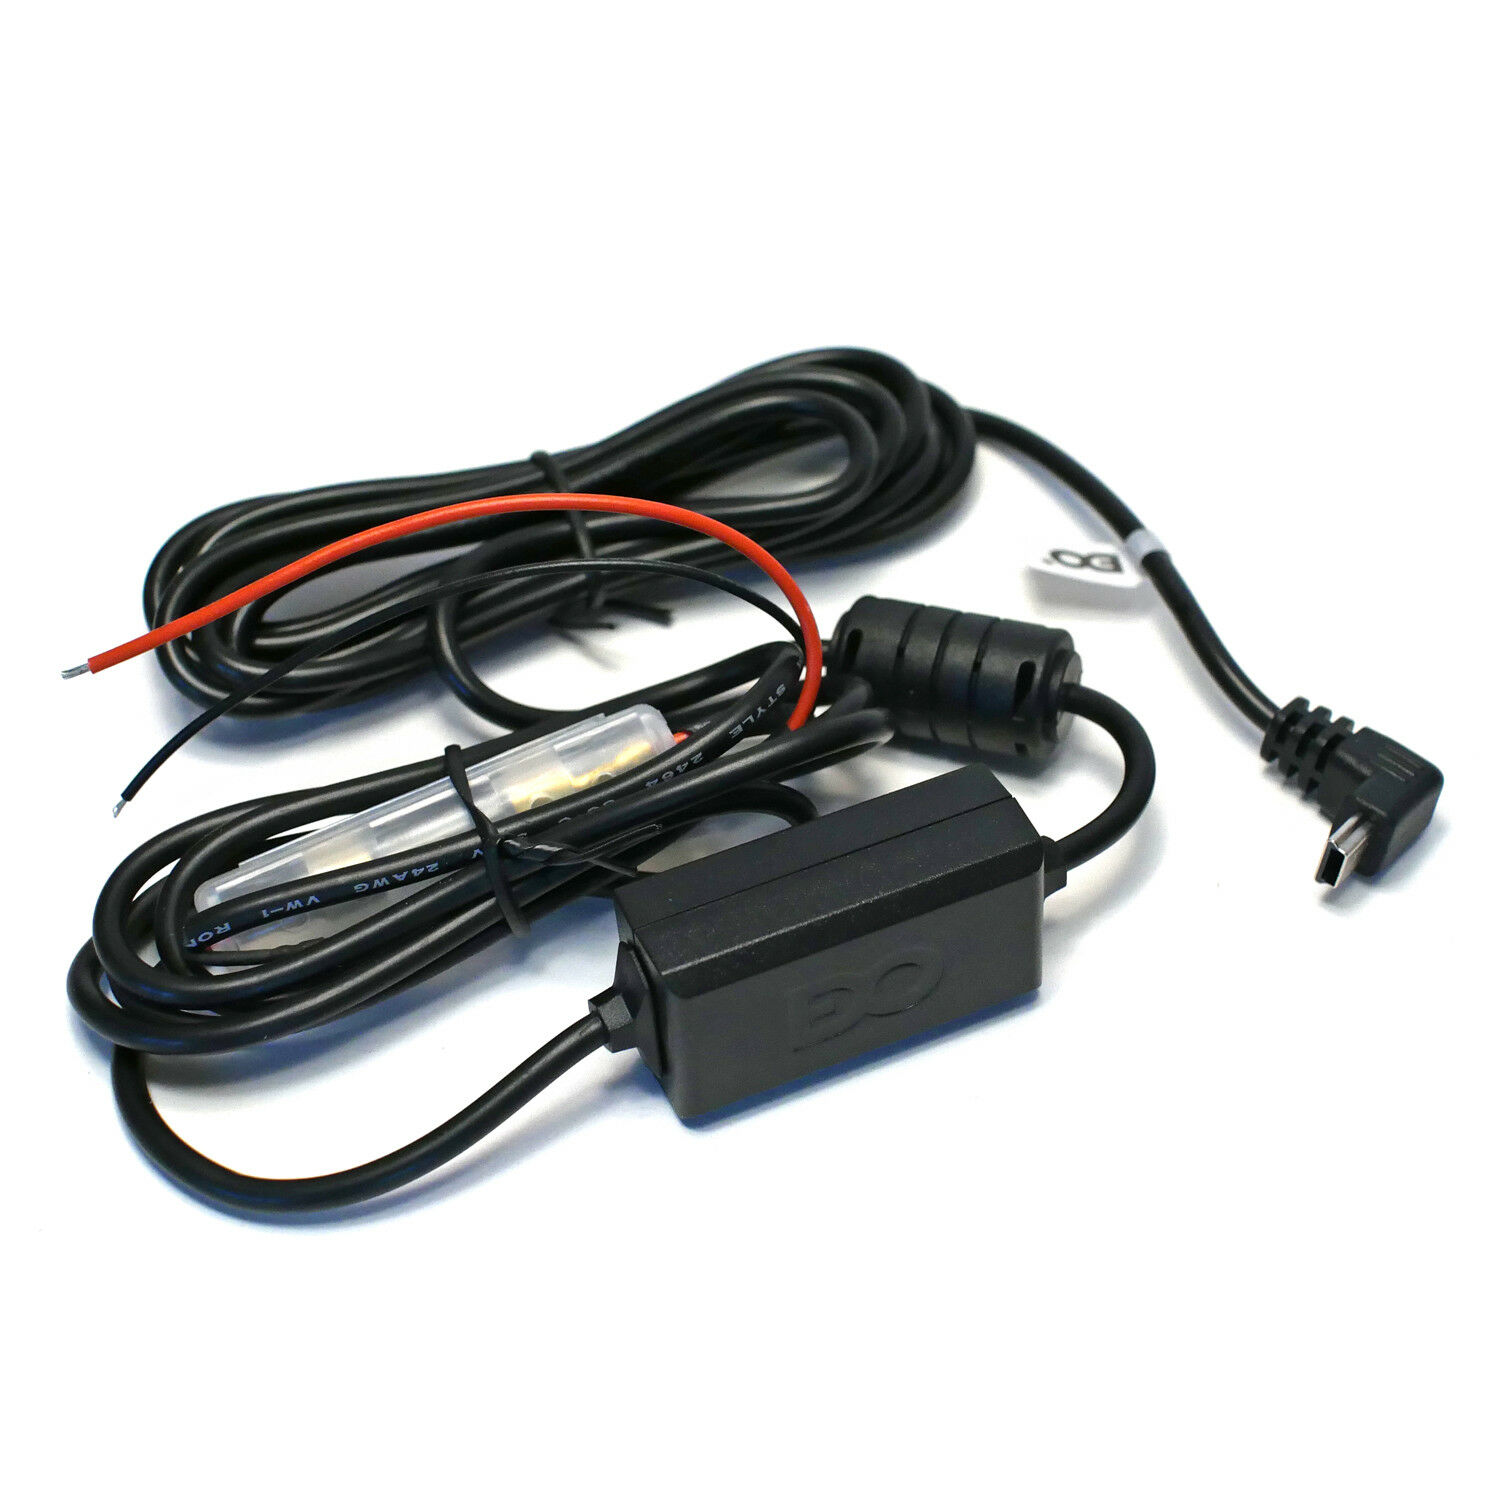 Hardwire Usb Car Charger Power Cord Kit For Garmin Nuvi 2505 2508 2507 200 Gps